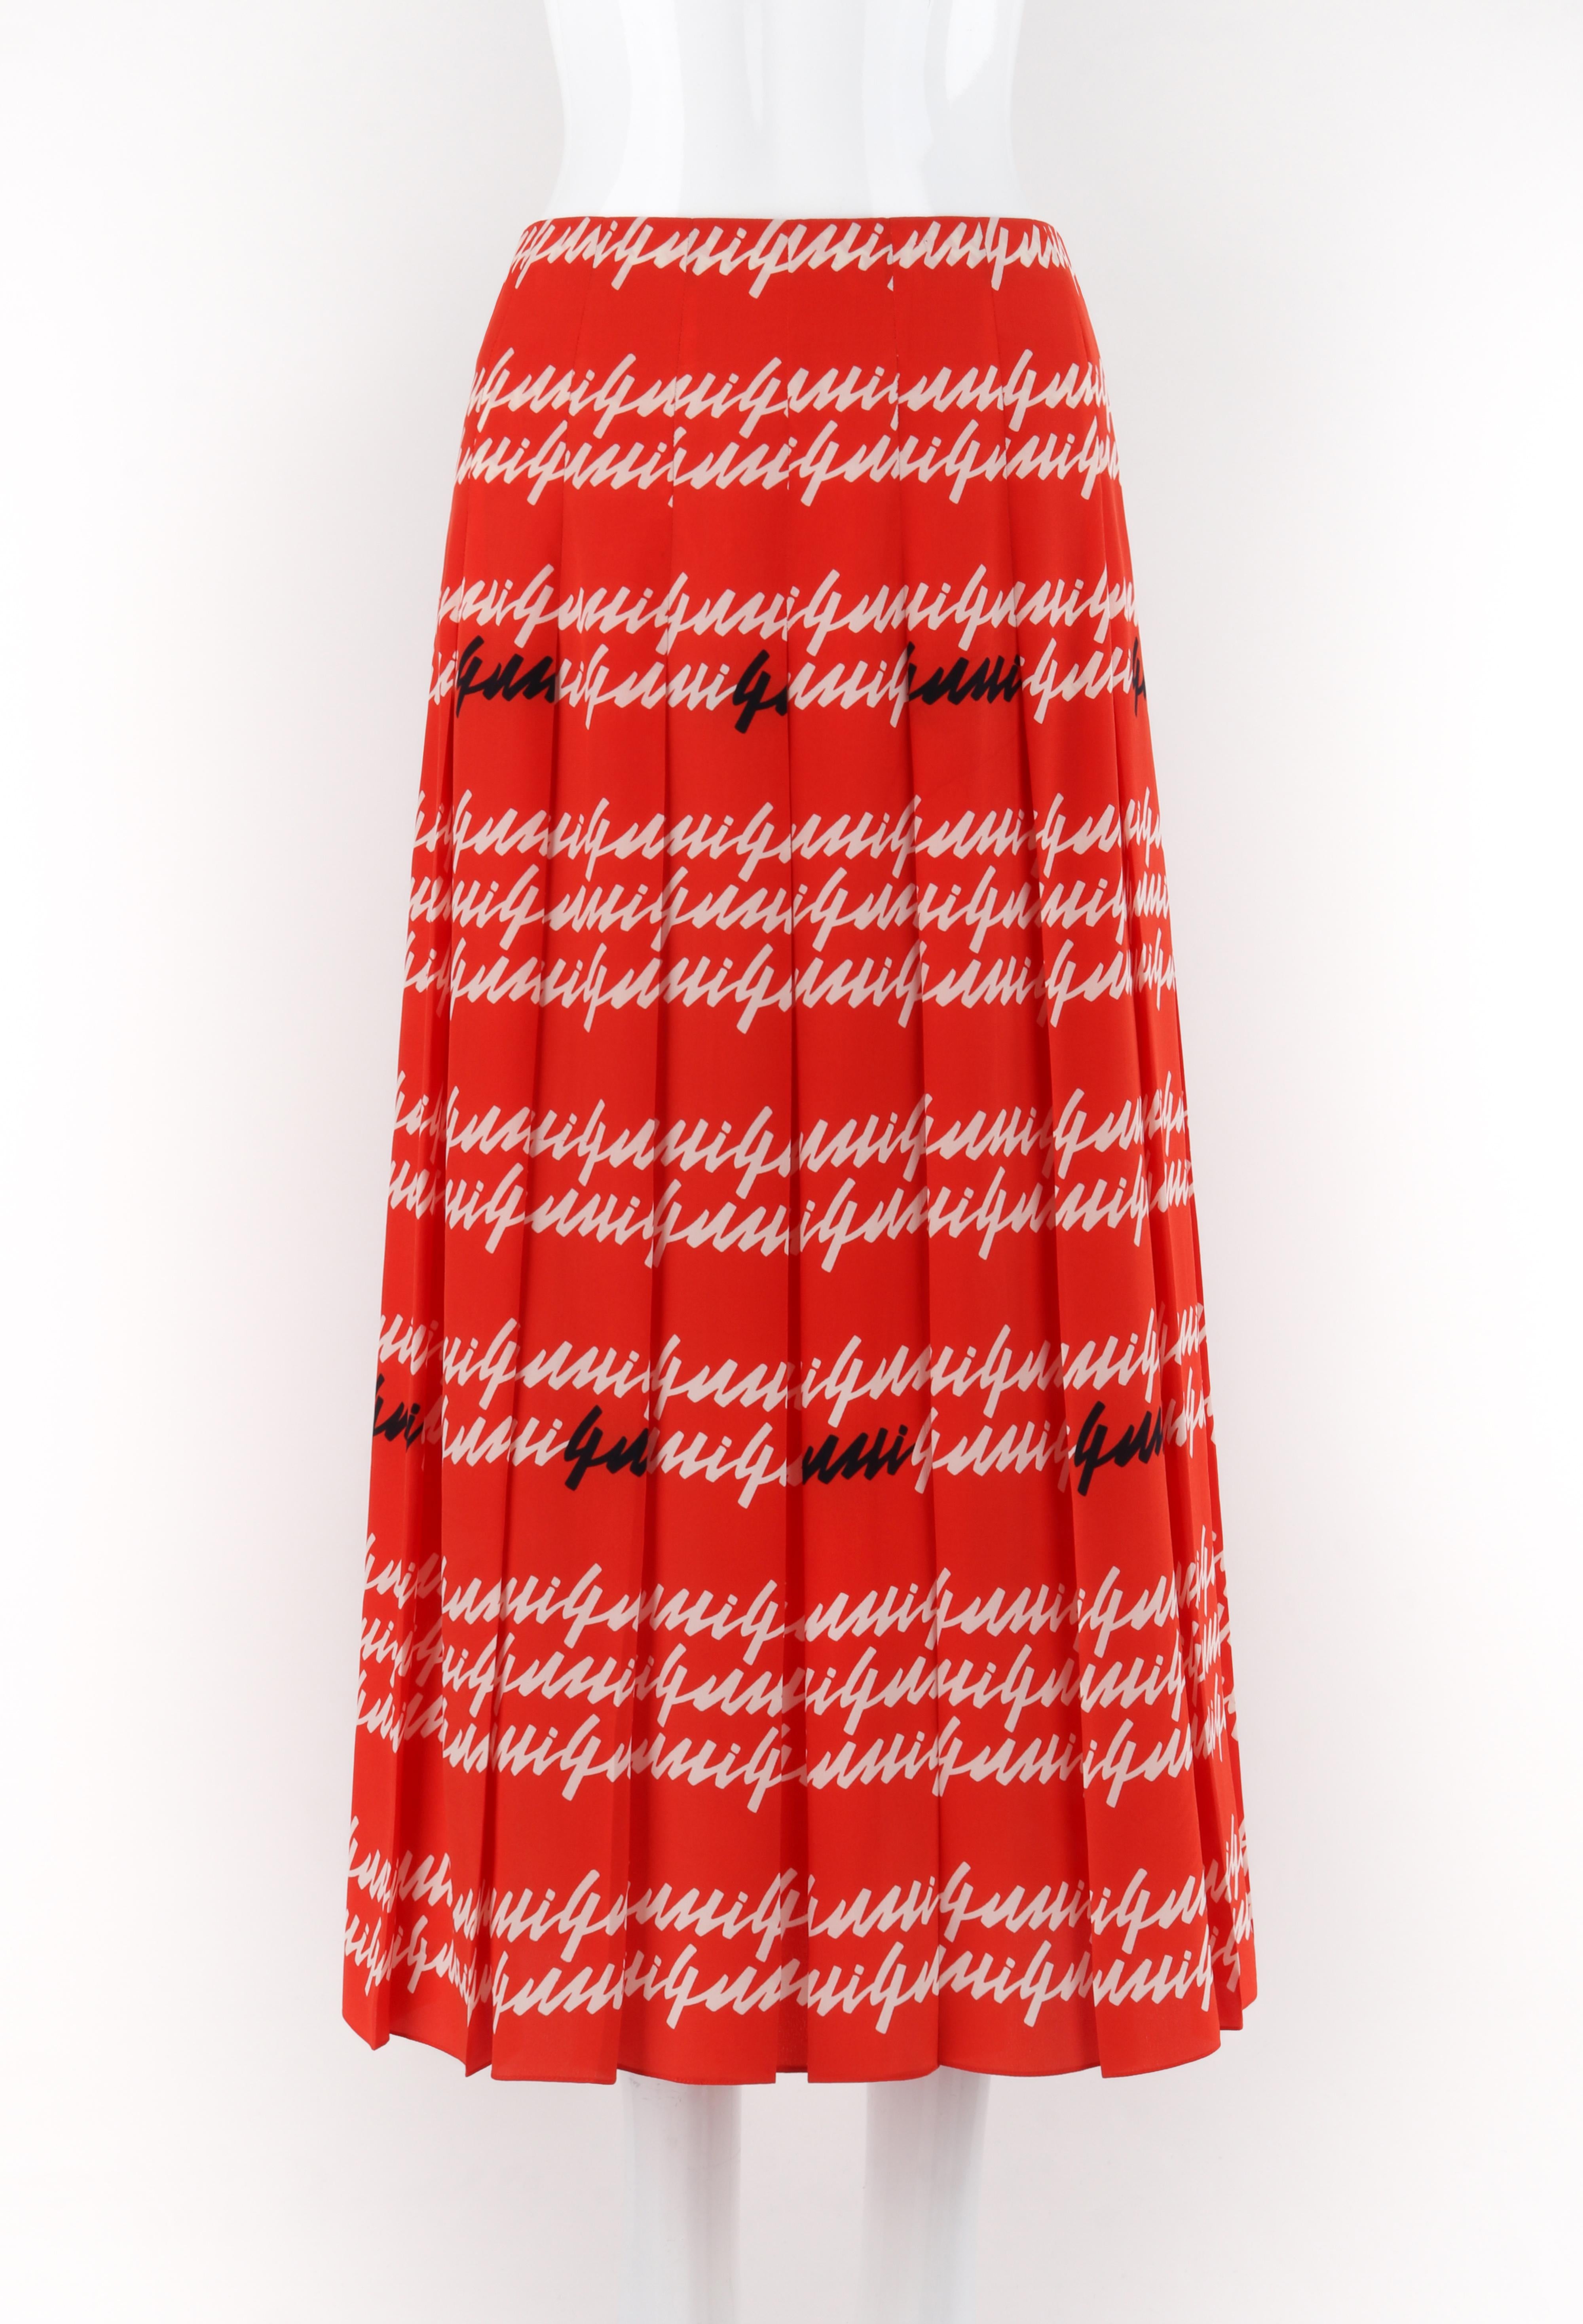 GUCCI S/S 2016 Orange Black White Pleated Silk Scripture Print Maxi Skirt

Brand / Manufacturer: Gucci
Collection: Spring/Summer 2016
Designer: Alessandro Michele
Style: Maxi Skirt
Color(s): Shades of orange, white, black
Lined: No
Marked Fabric